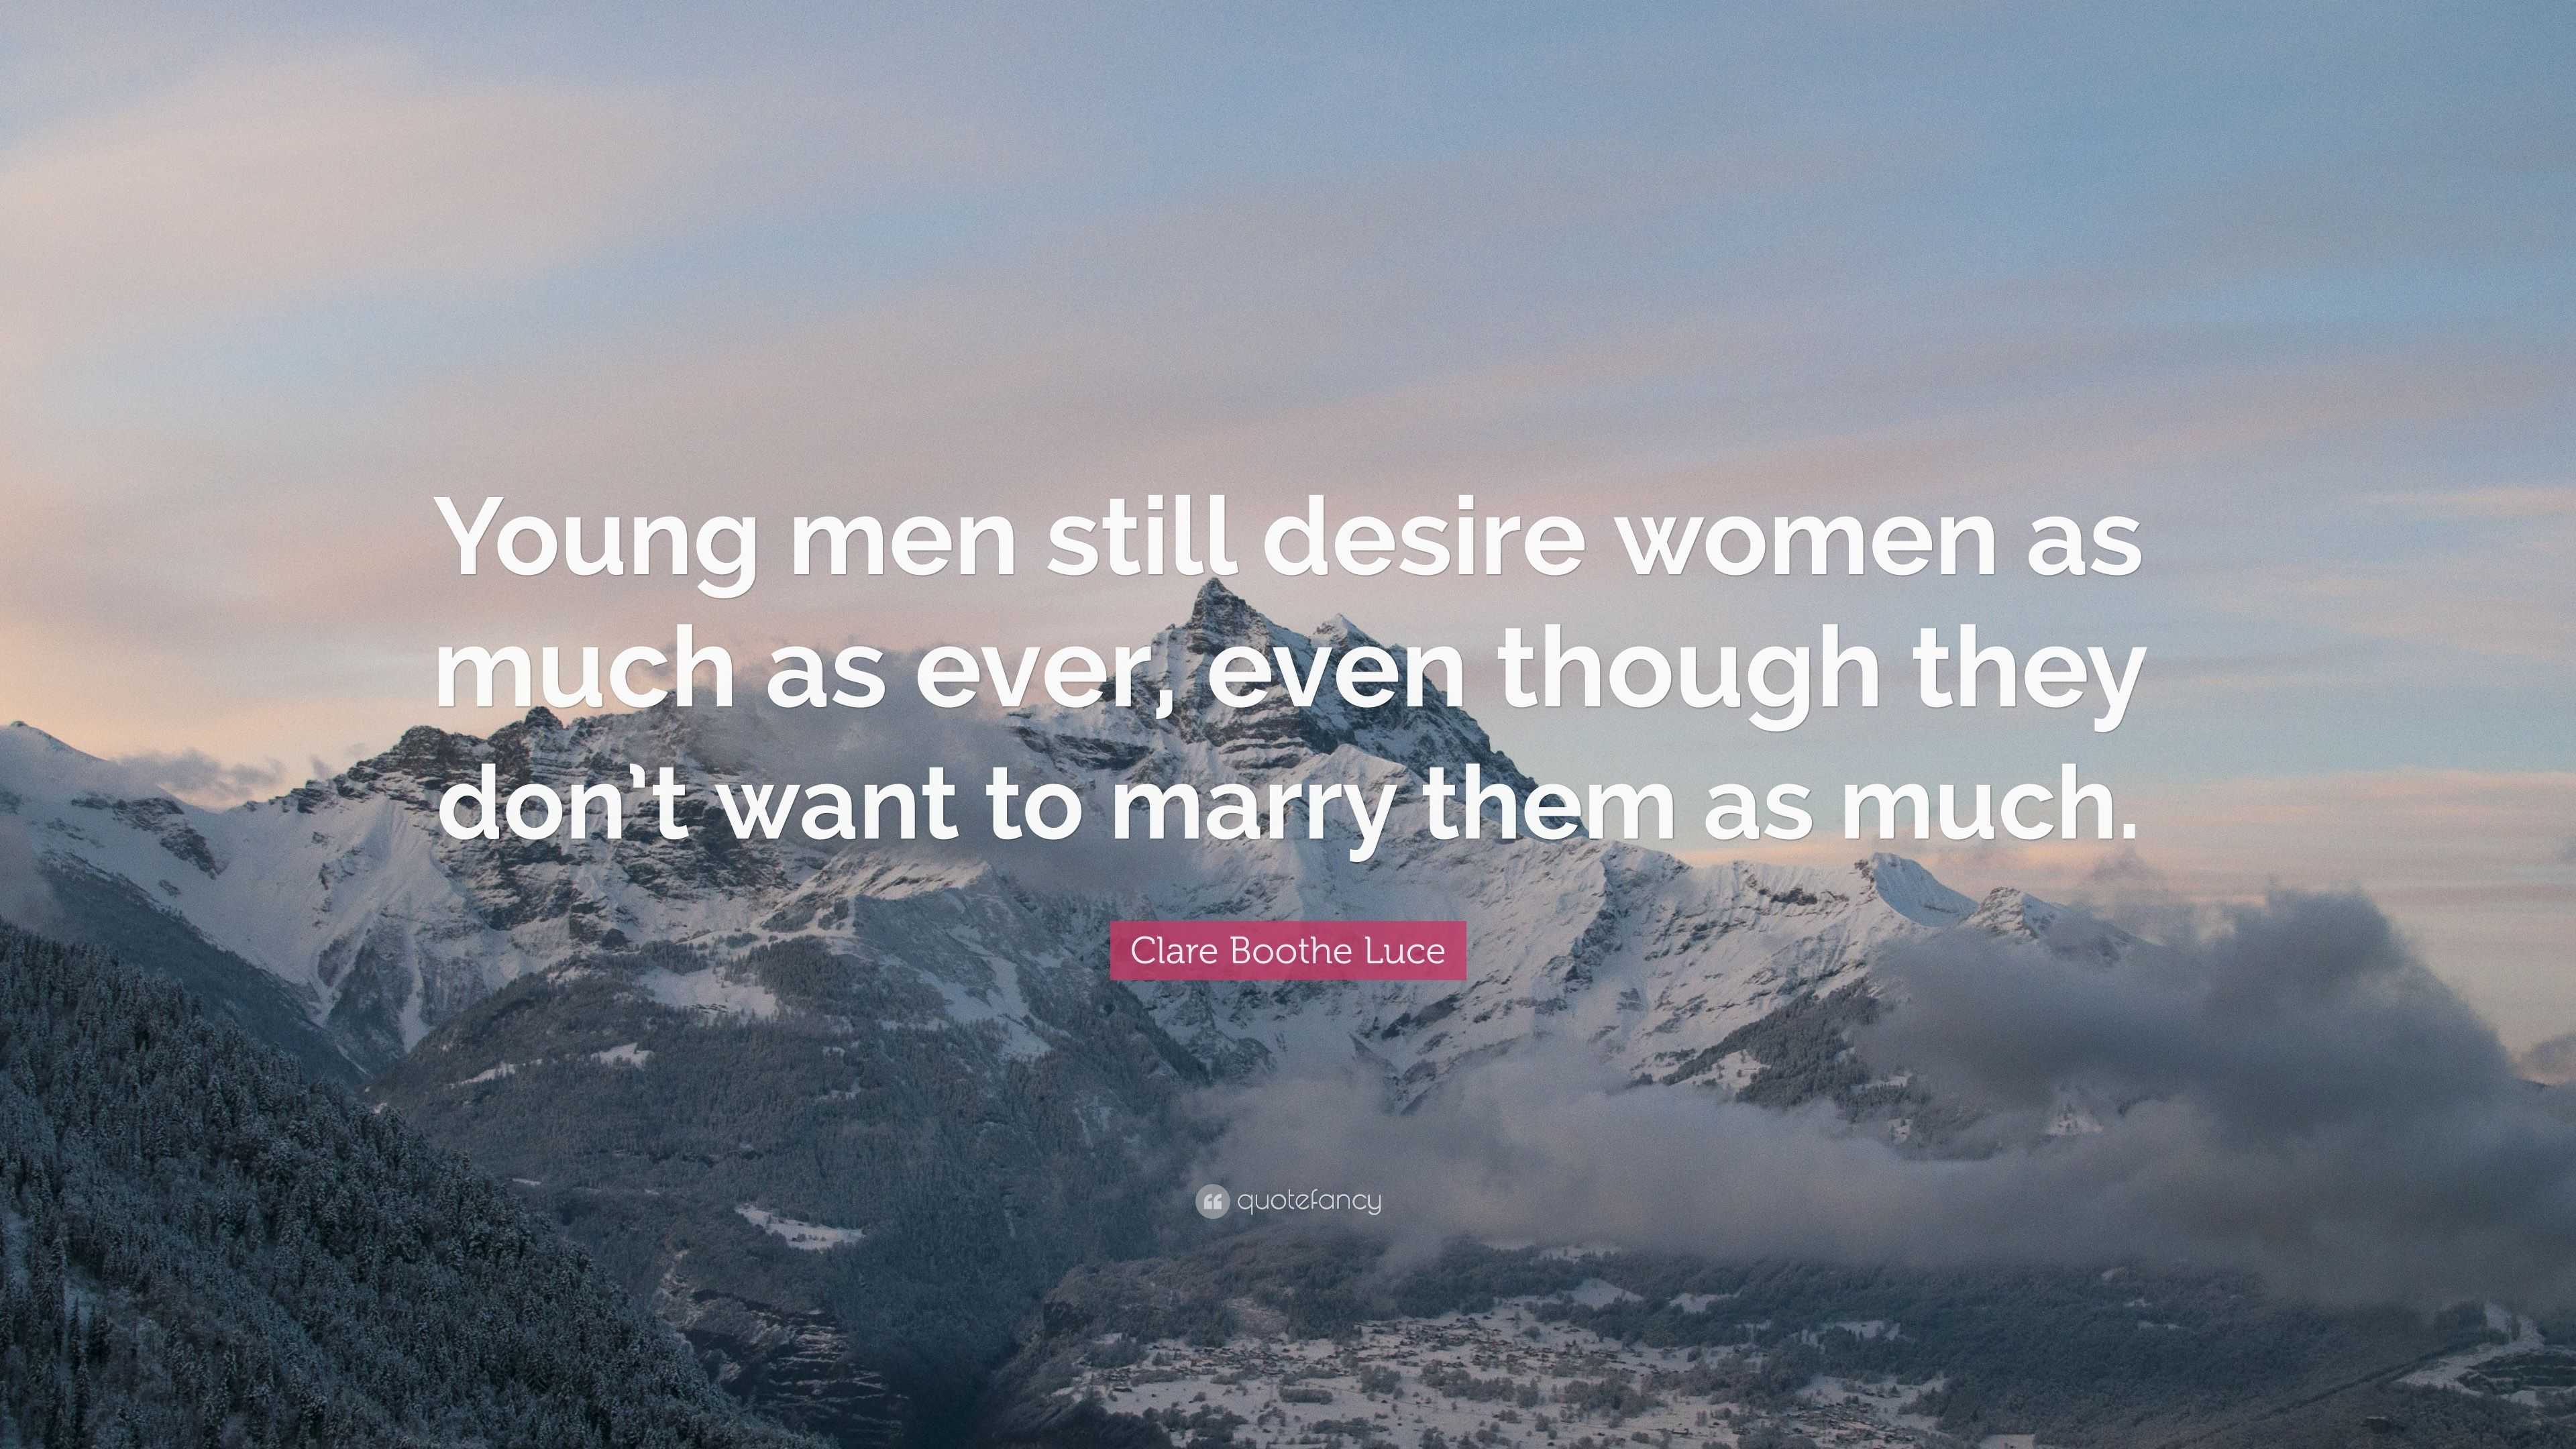 Clare Boothe Luce Quote: “Young men still desire women as much as ever ...